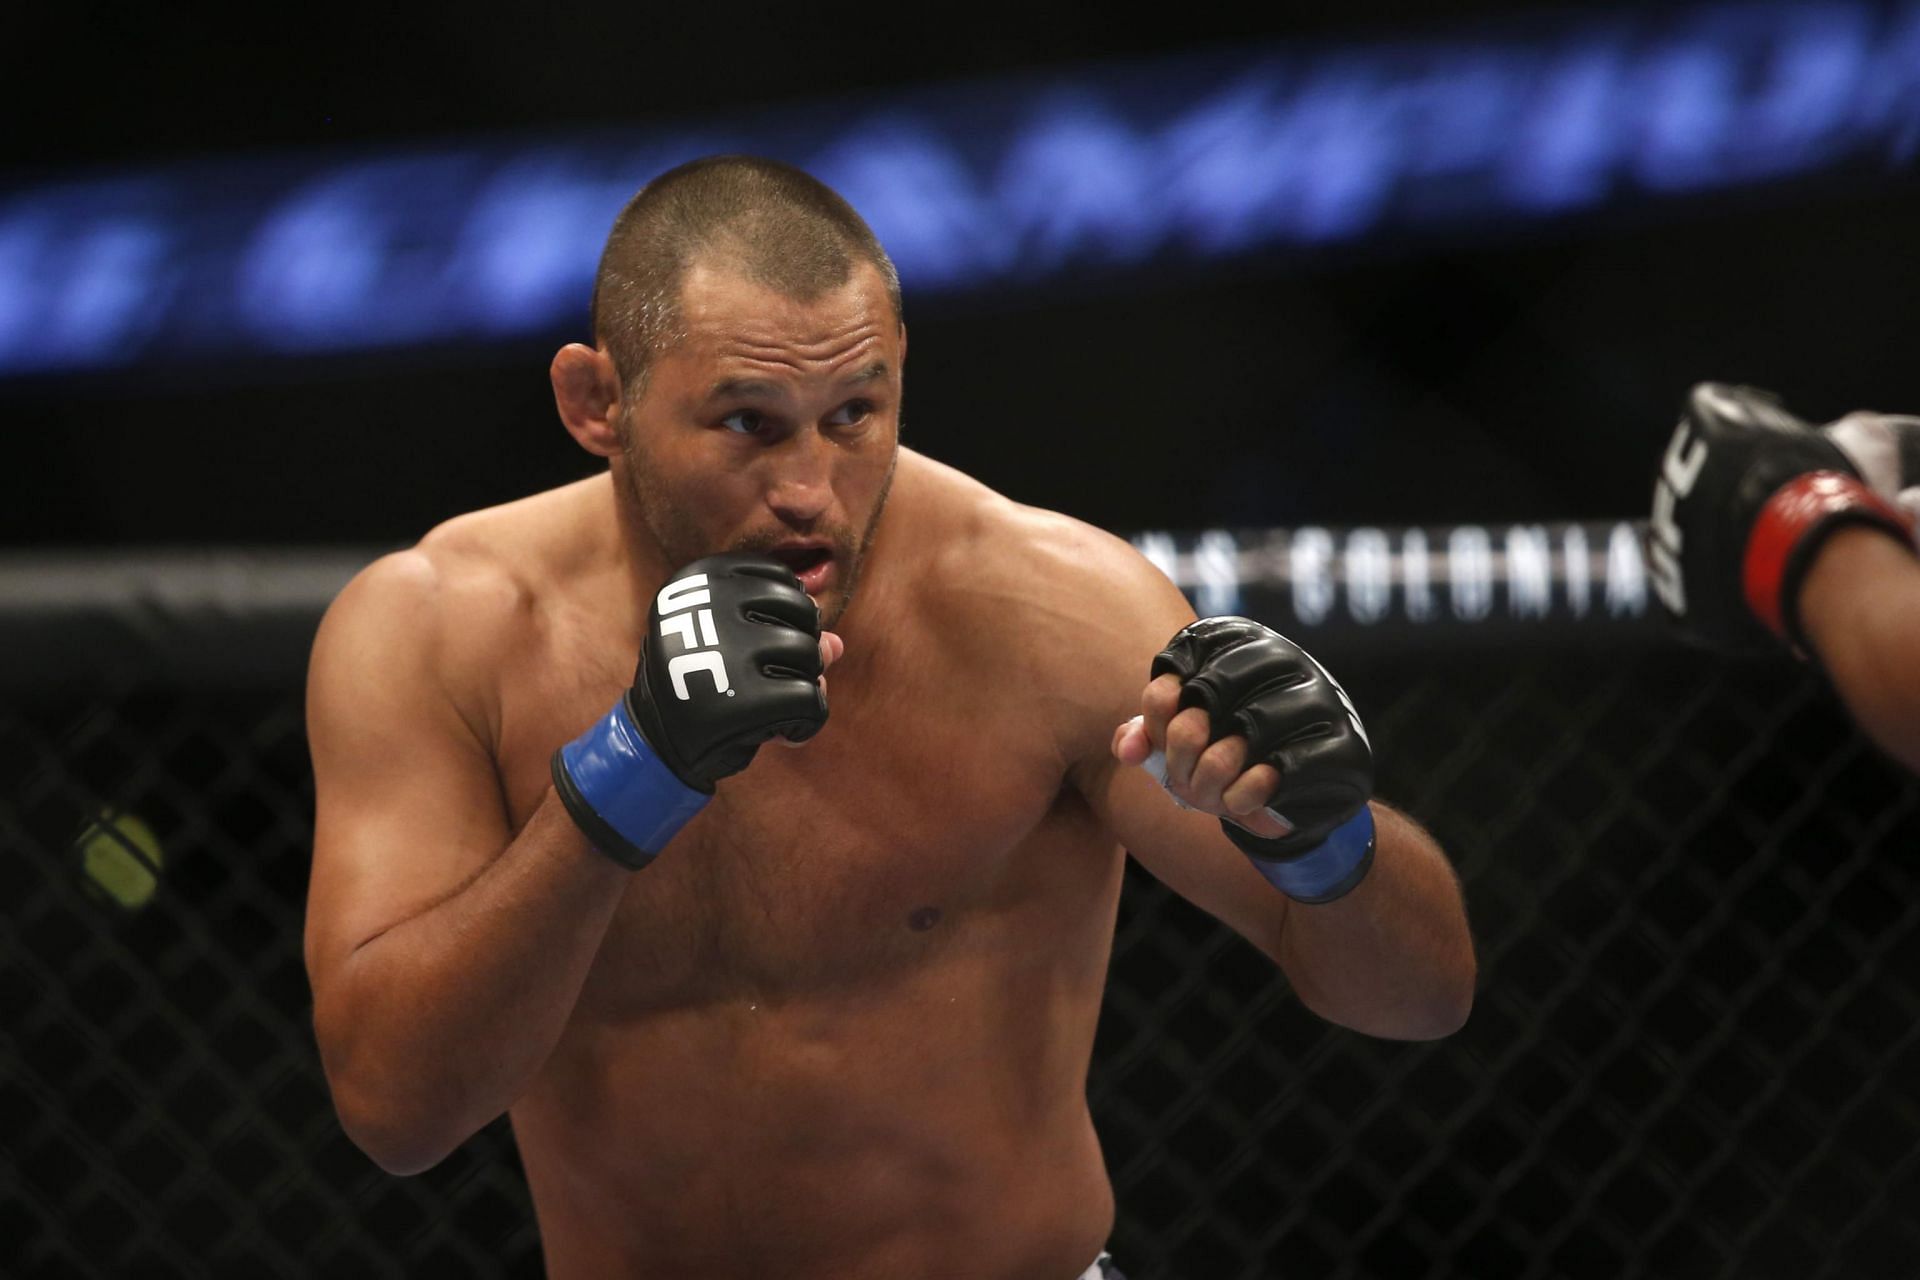 Dan Henderson's brutal right hand has been nicknamed 'The H-Bomb' due to its concussive power